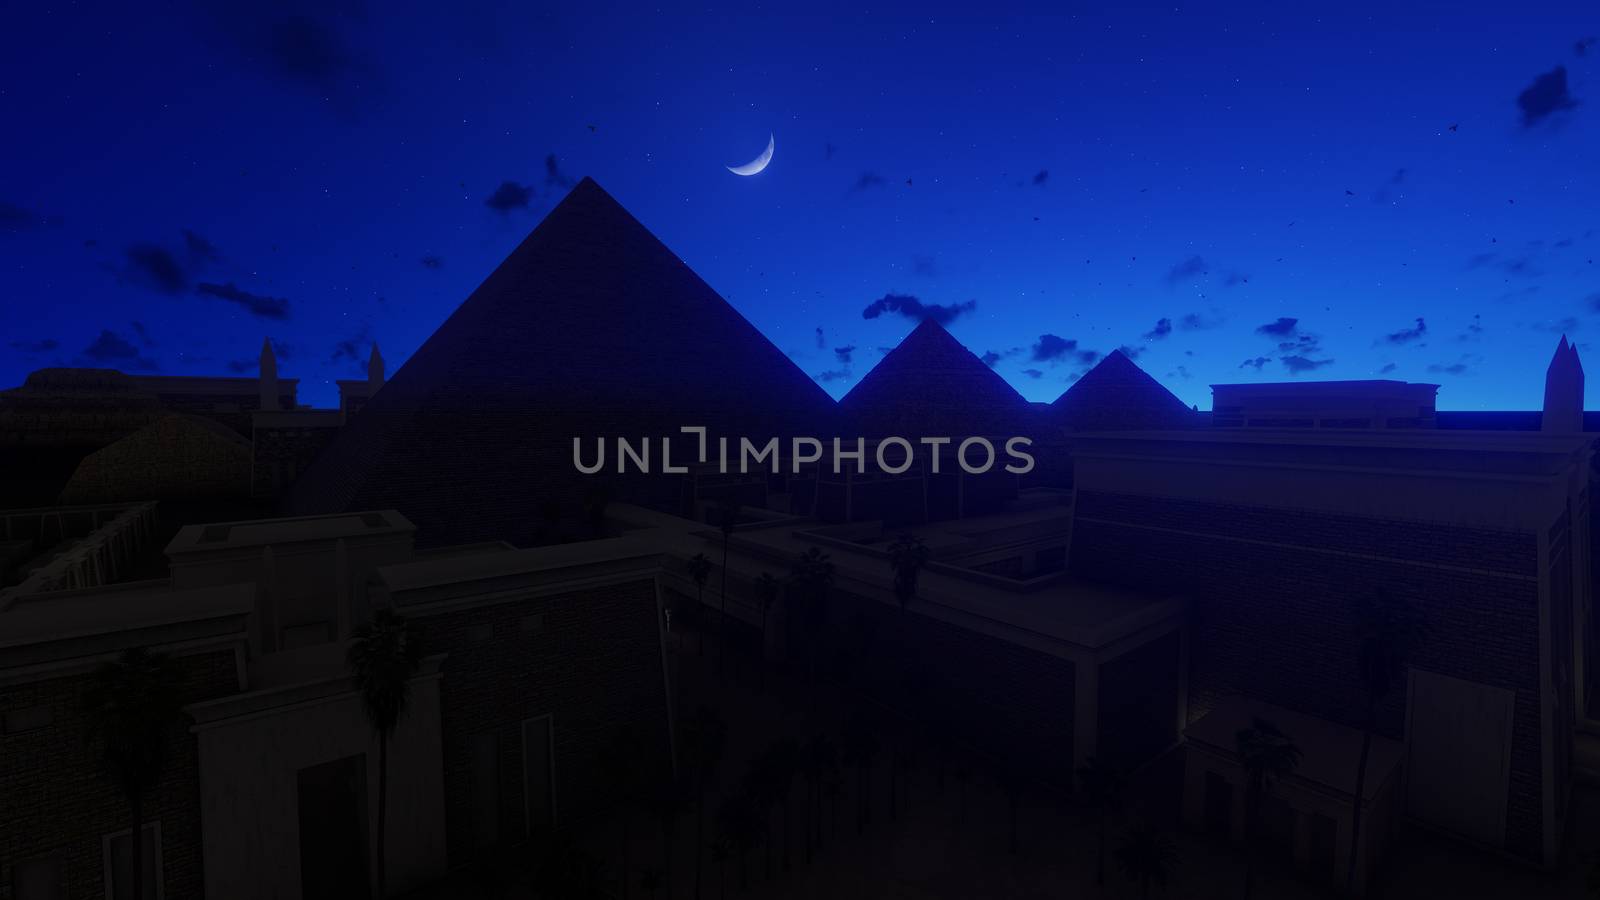 The Great Pyramids at Giza against starry sky, Cairo Egypt